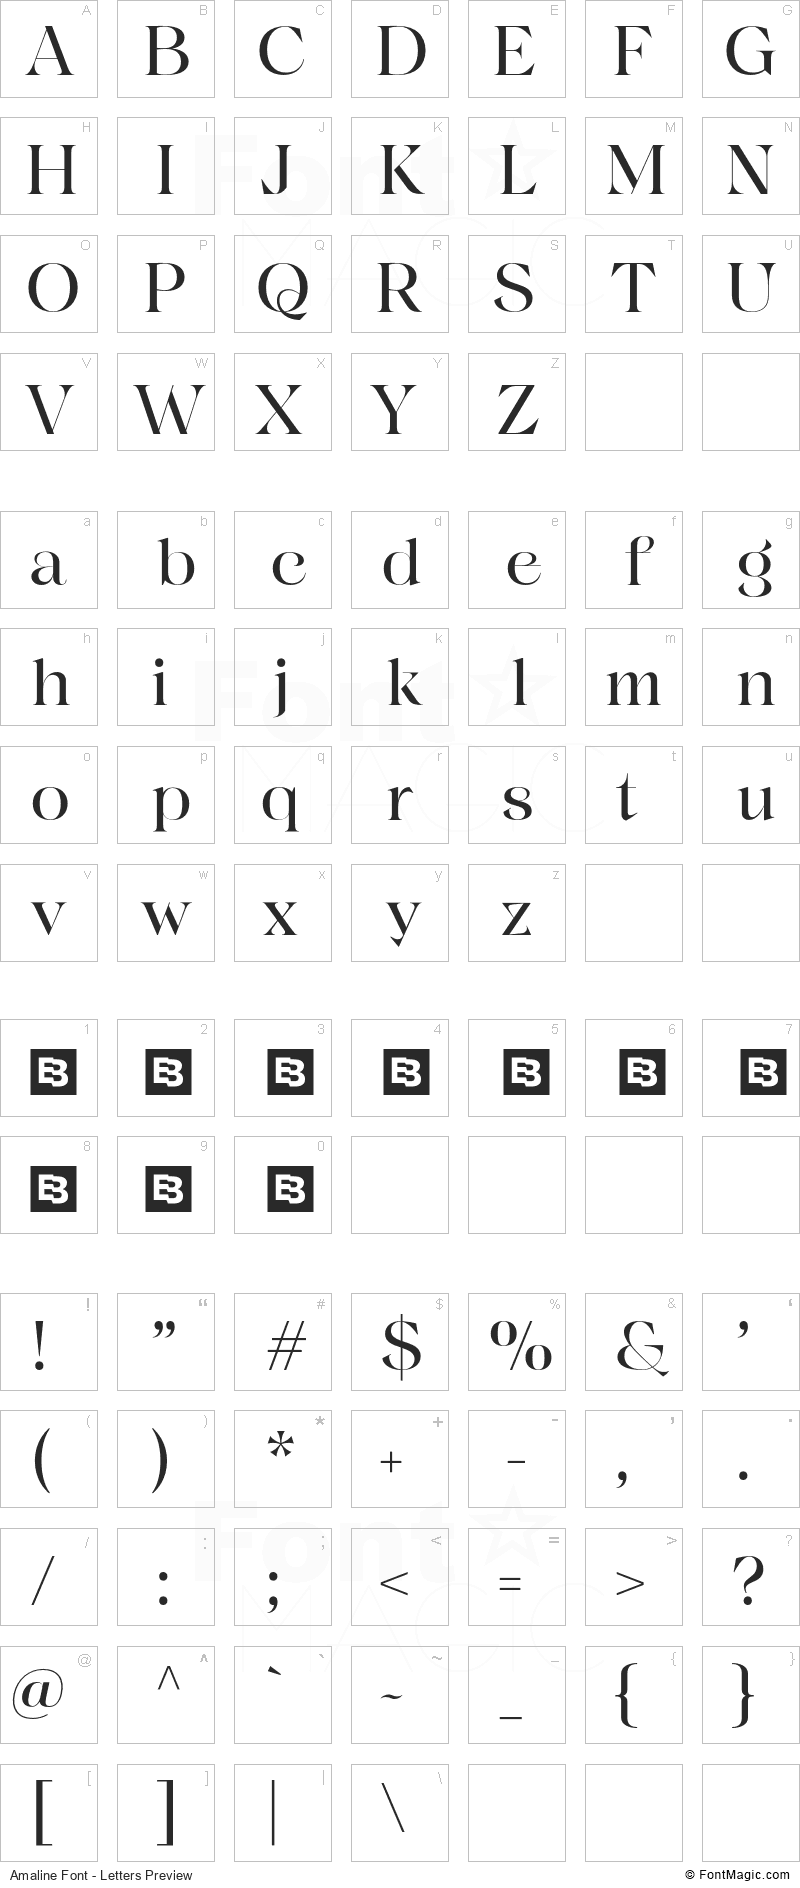 Amaline Font - All Latters Preview Chart